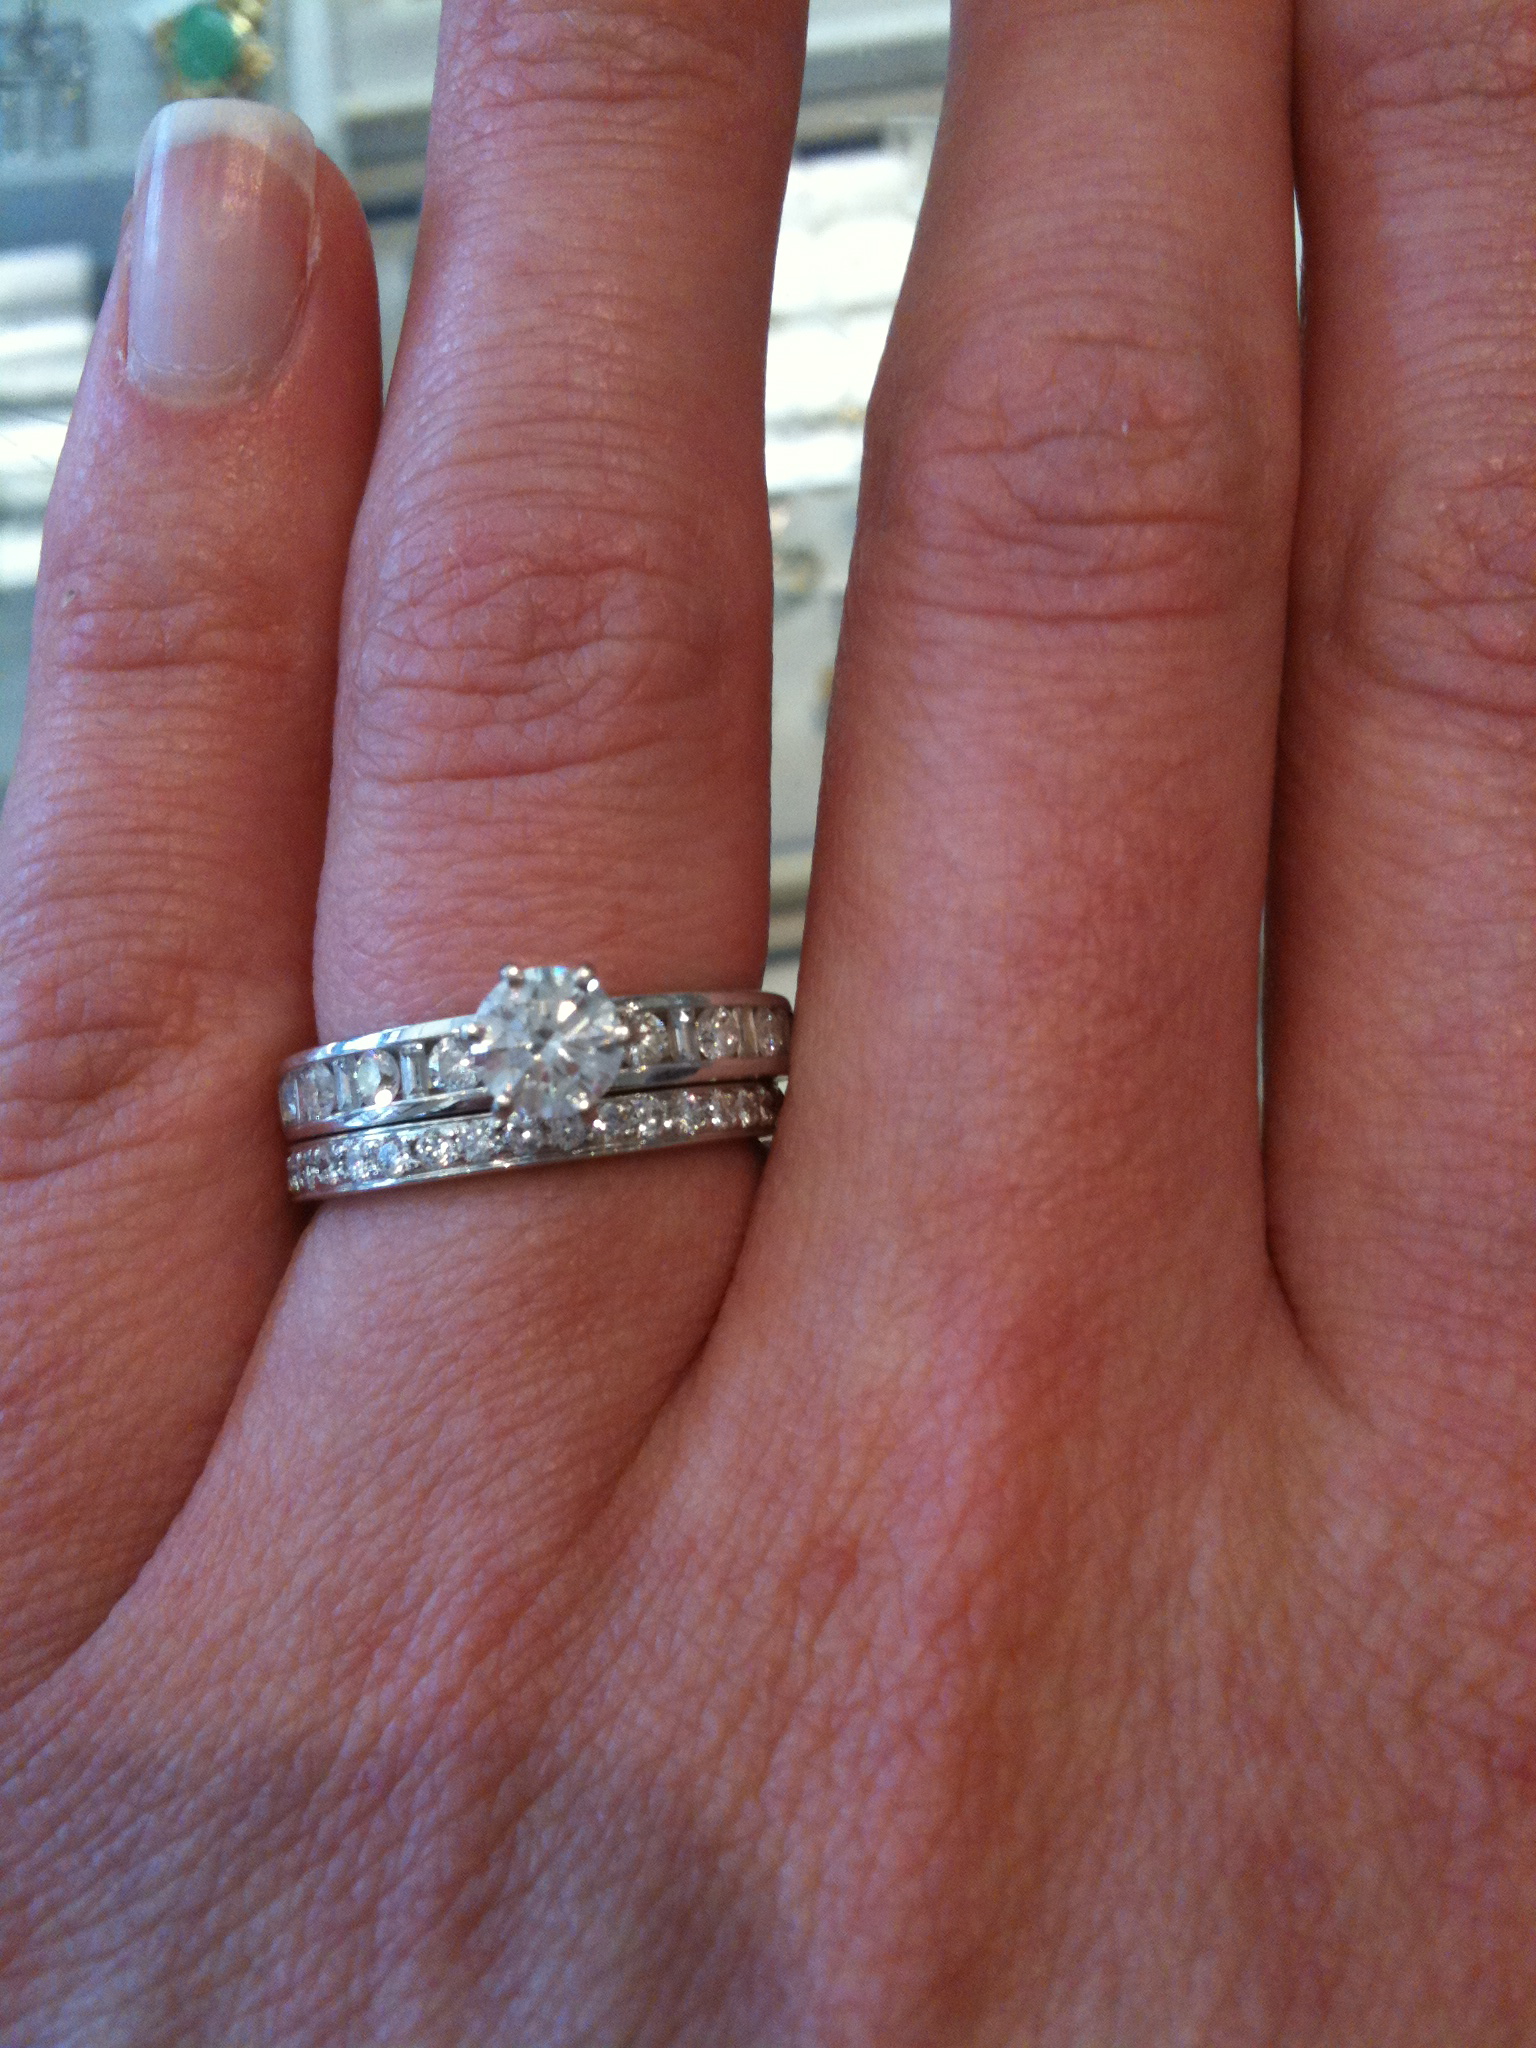 Engagement and wedding ring placement